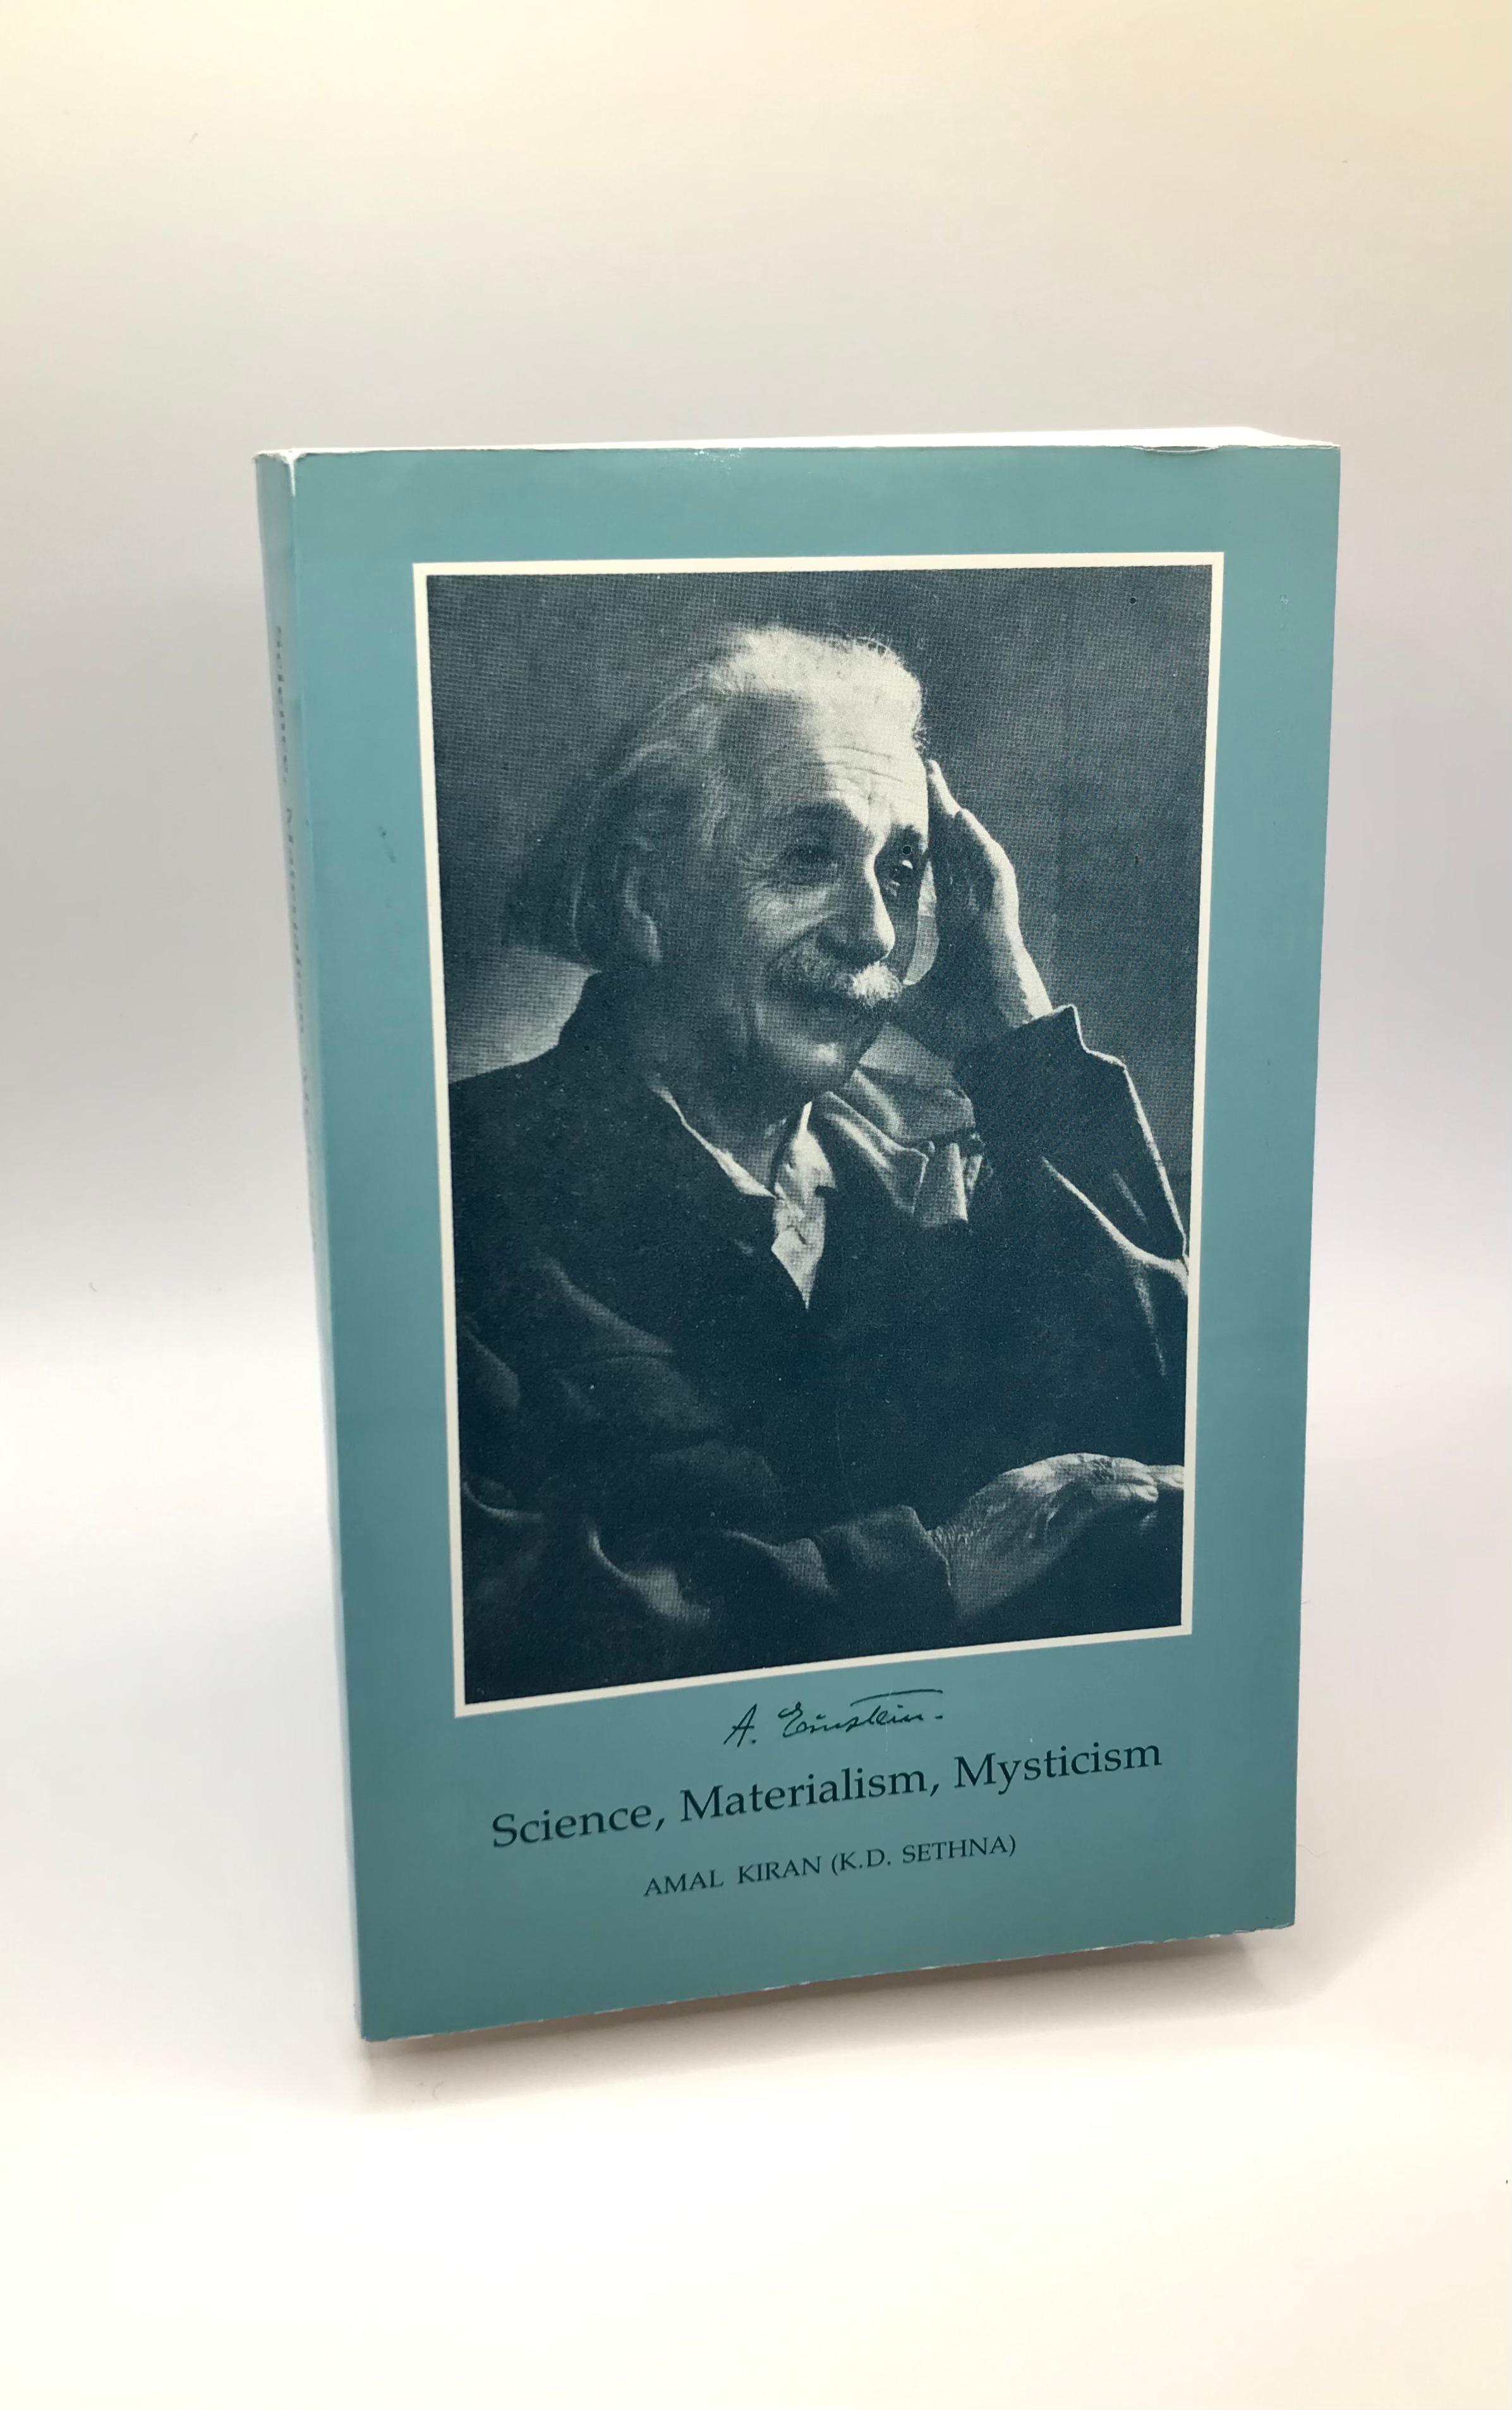 Science, Materialism, Mysticism by Amal Kiran